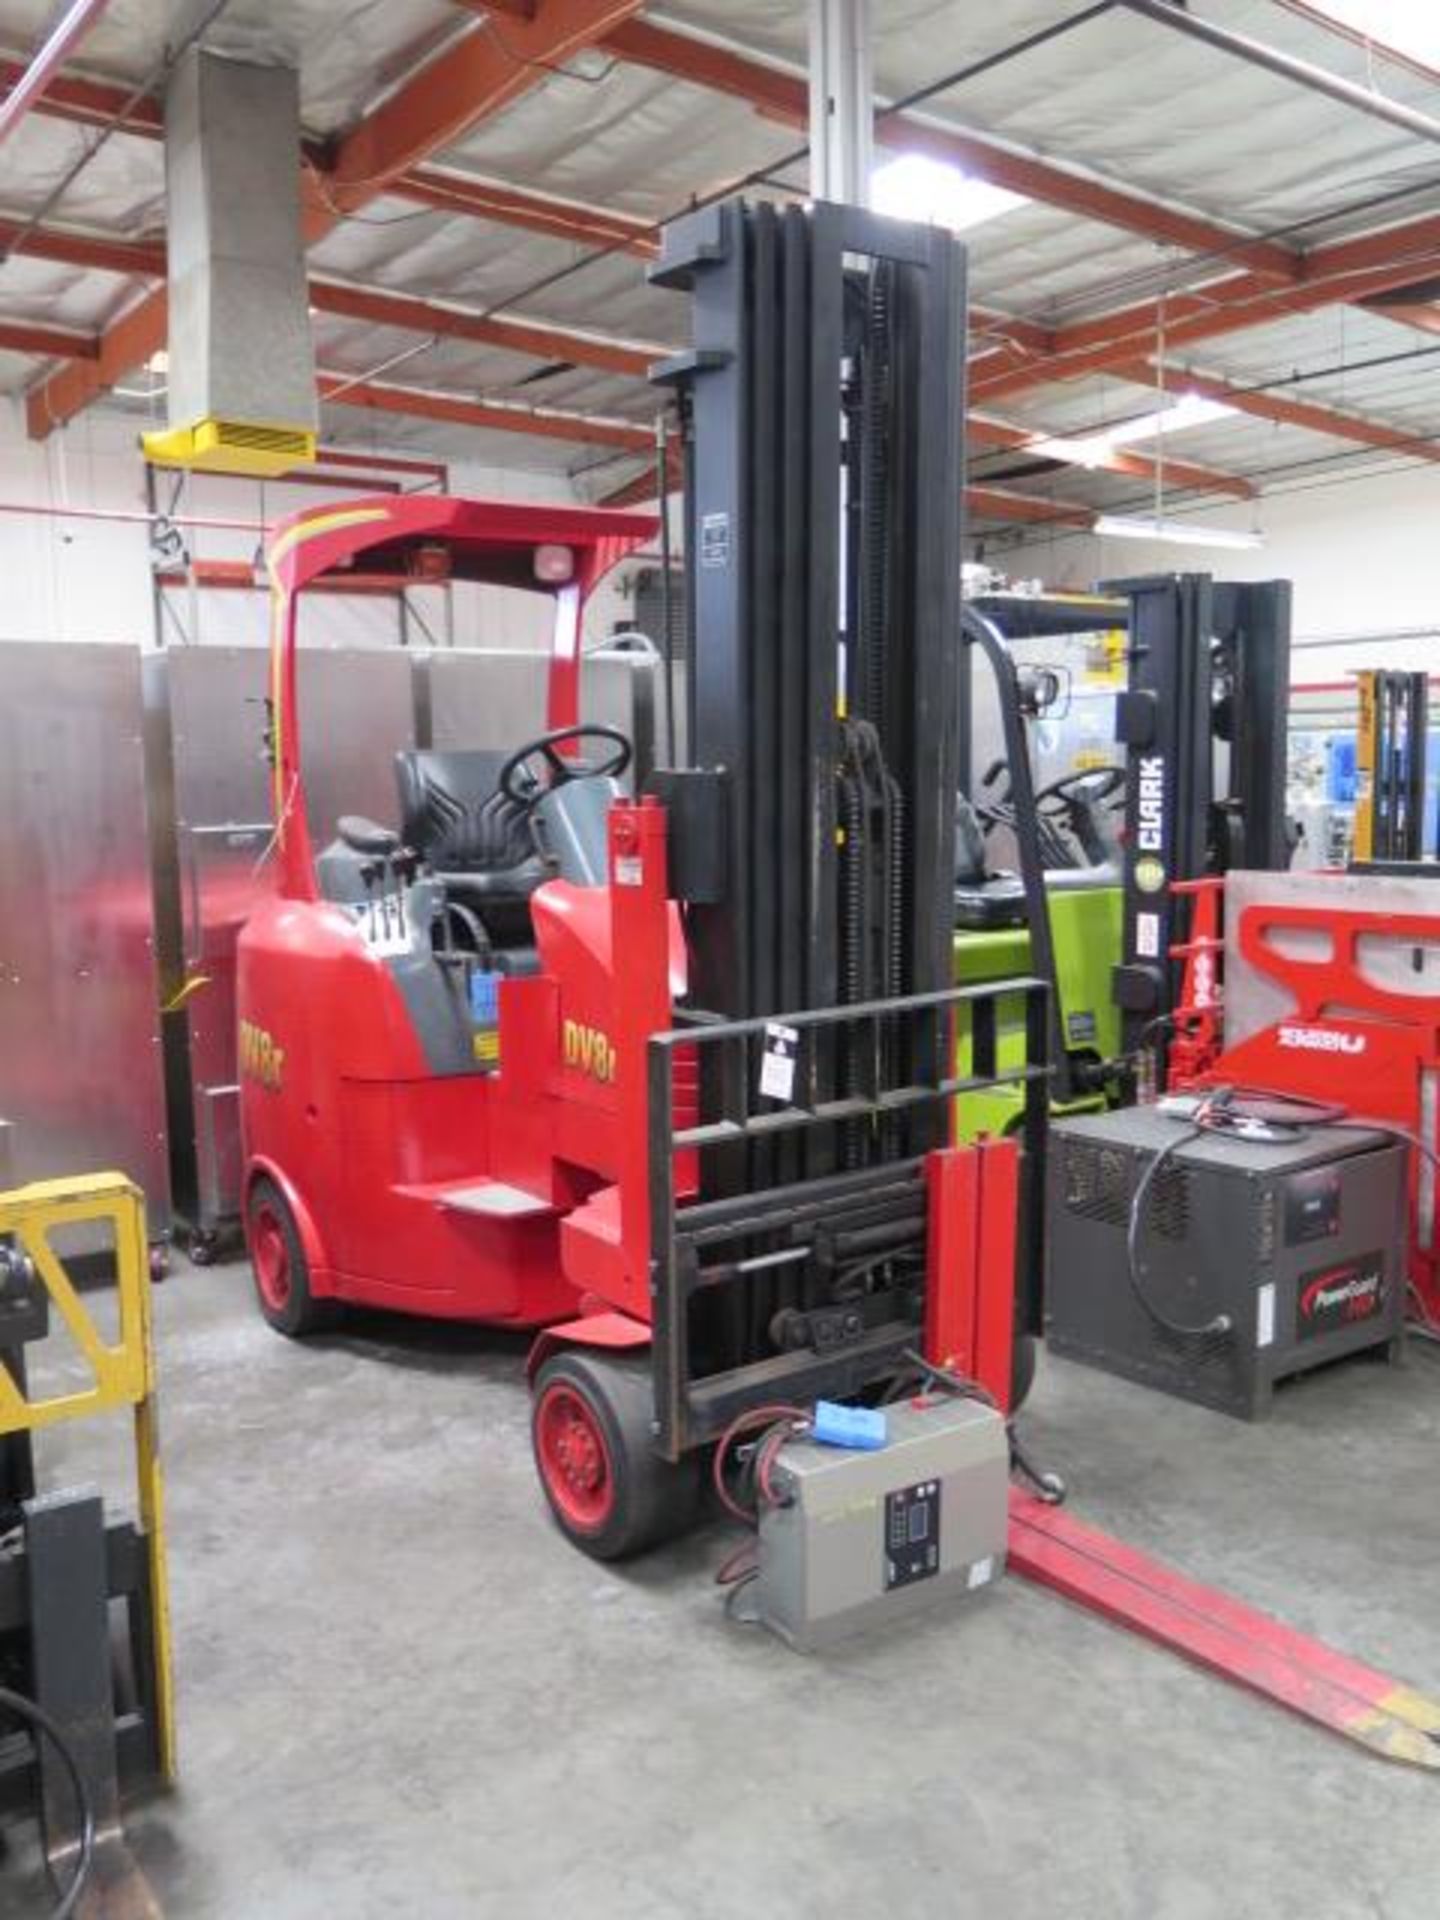 Tailift USADV8SR 2265 Lb Cap Articulating Elect Forklift s/n 600217 w/4-Stage, 258" Lift, SOLD AS IS